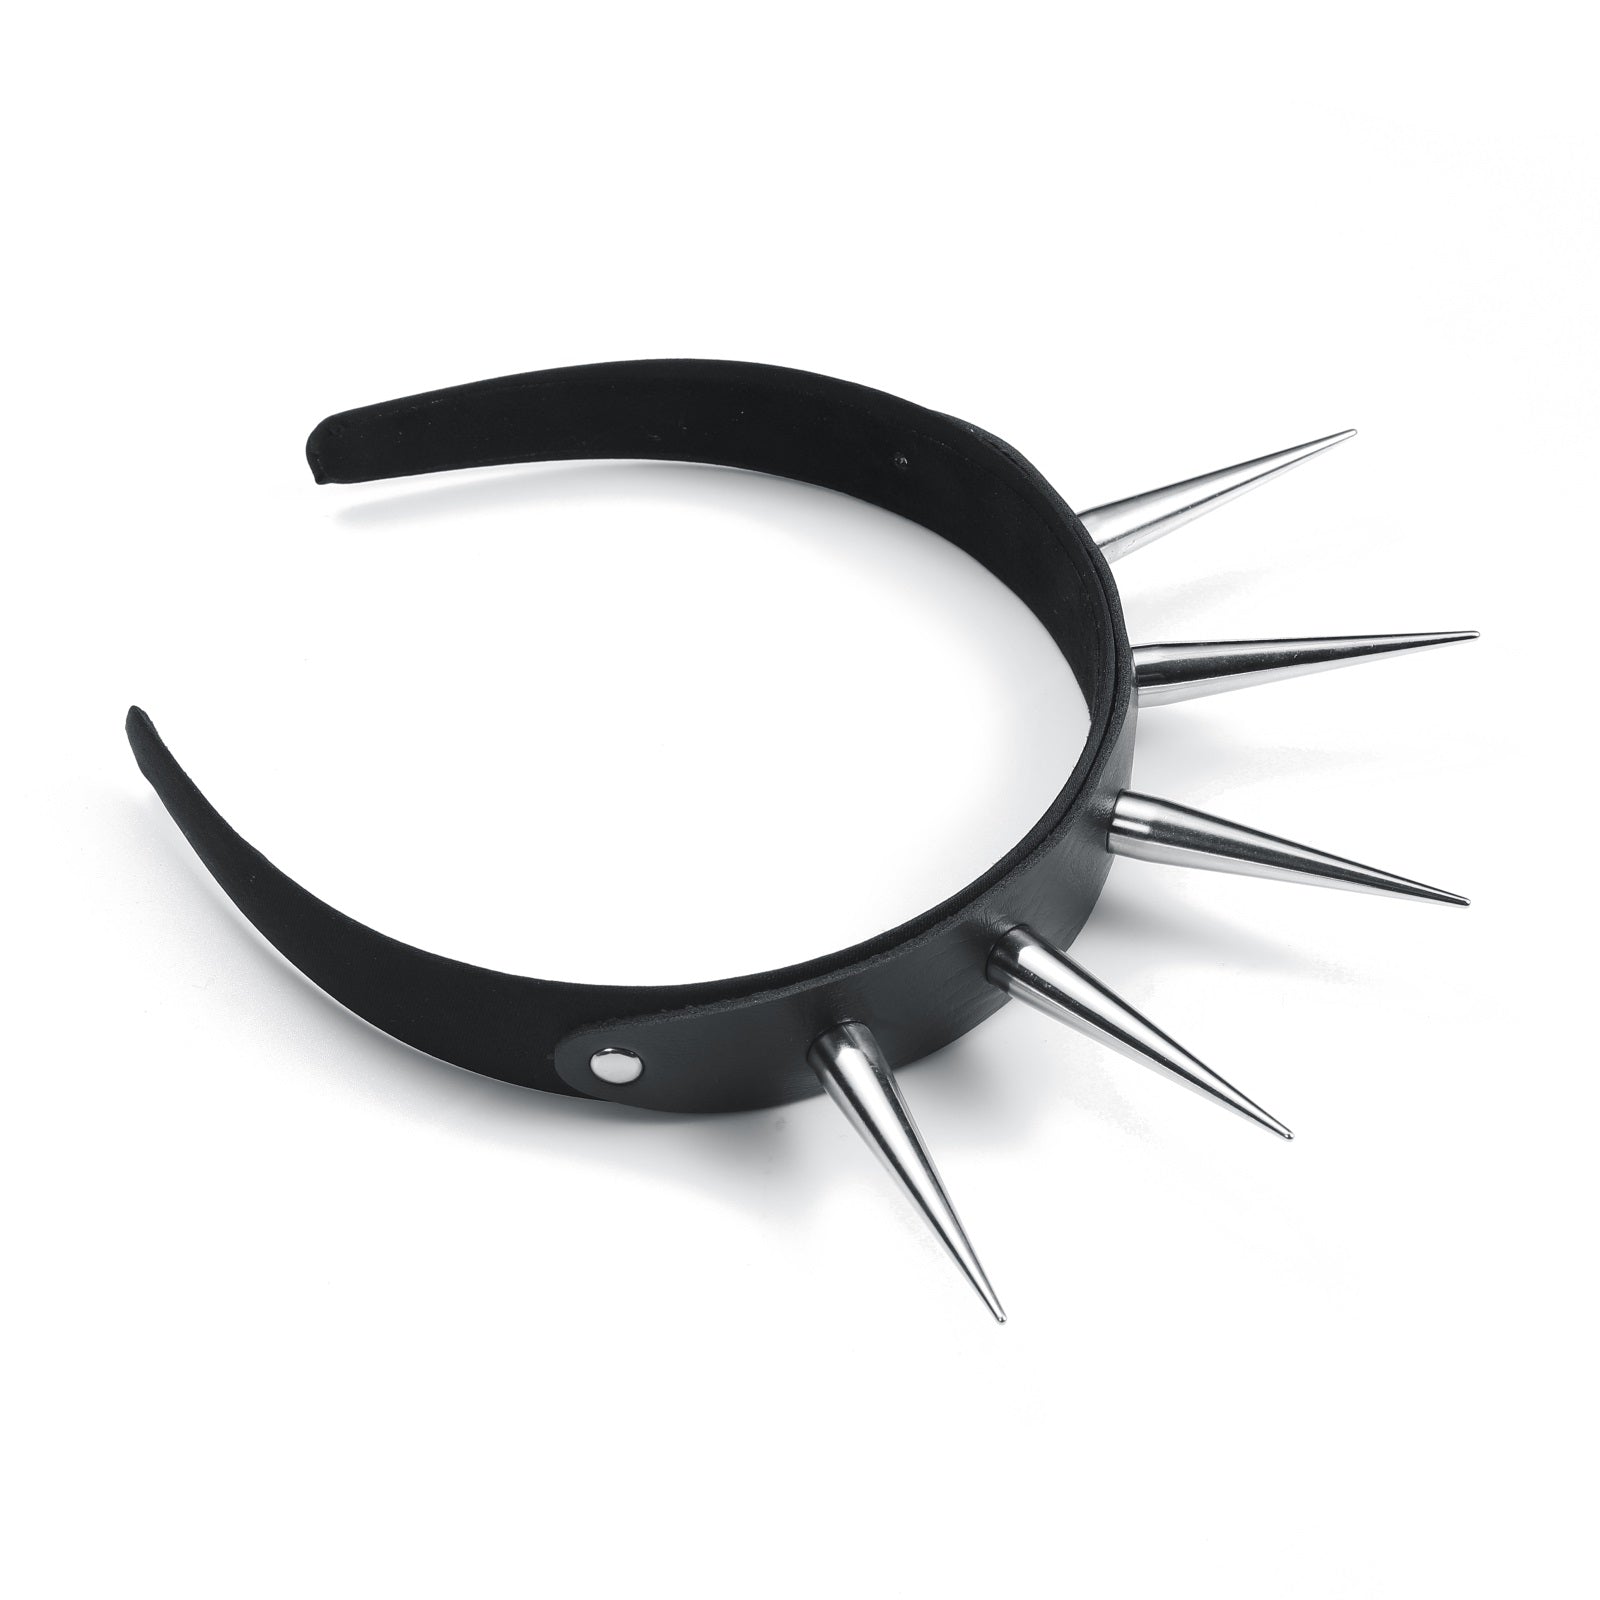 Danger Zone Spiked Headband. This headband features a black flexible band and a vegan leather strap with silver metal spikes across the top.